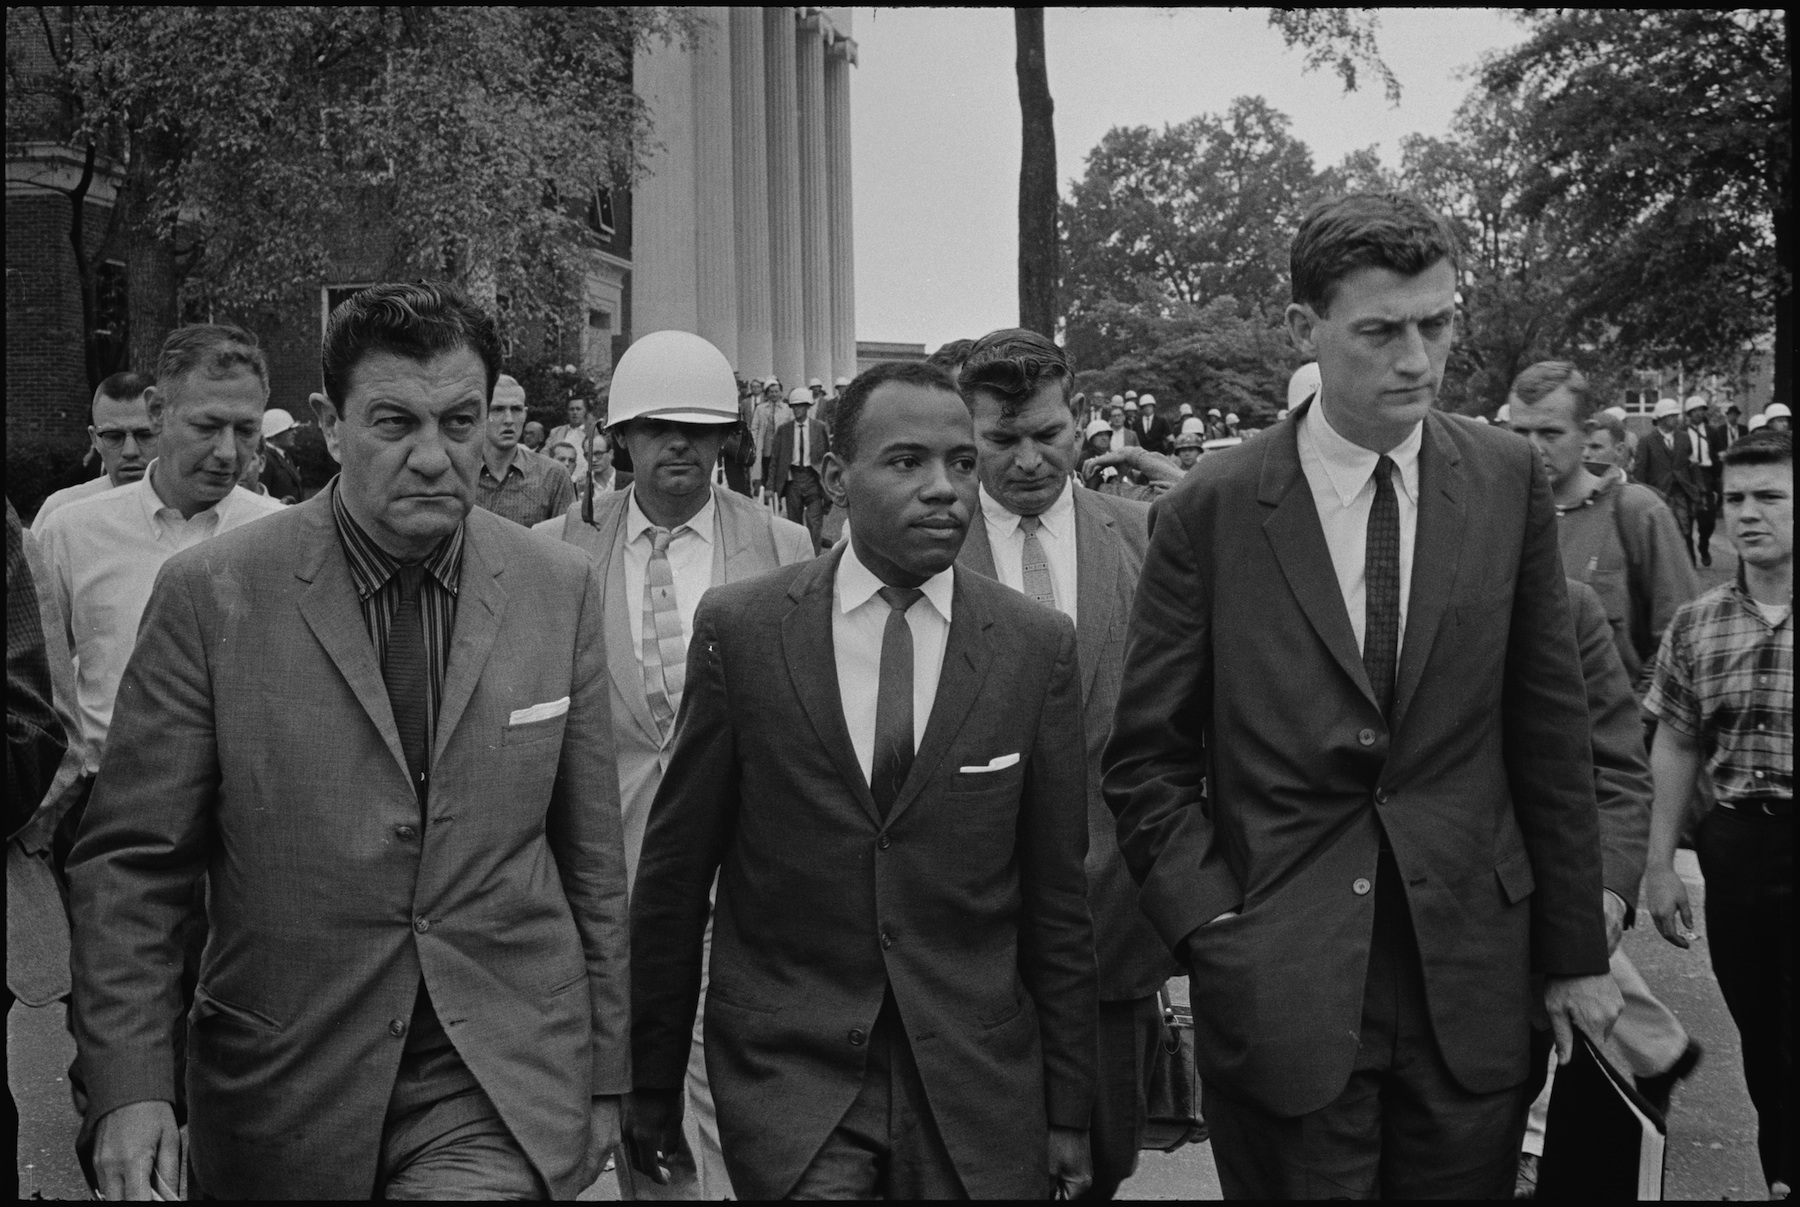 James Meredith walks to class at Ole Miss, accompanied by US Marshals